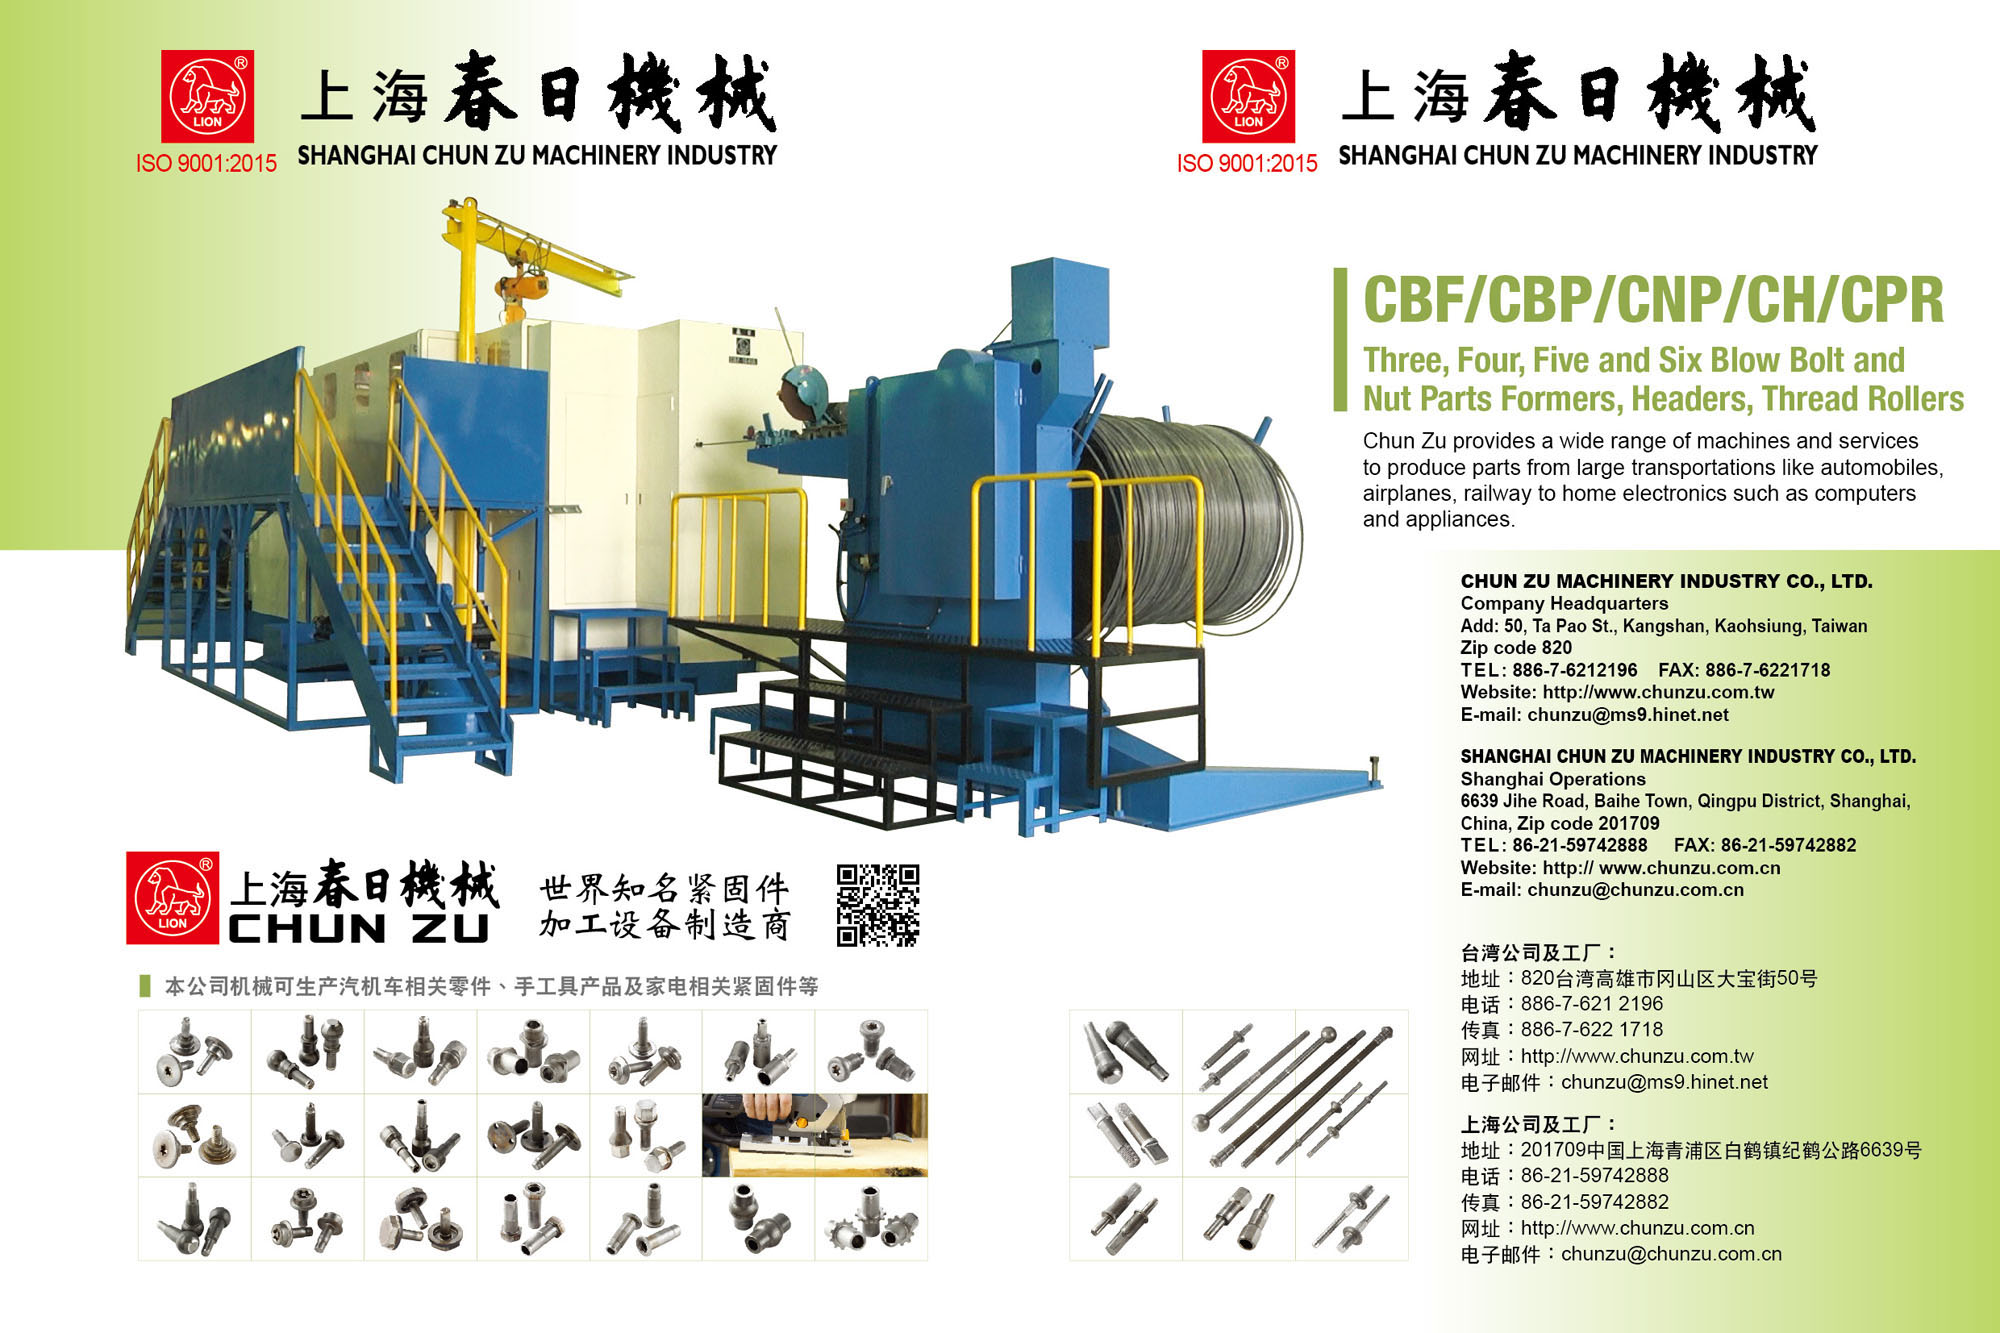 SHANGHAI CHUN ZU MACHINERY INDUSTRY CO.,LTD. , CBF/CBP/CNP Three, Four, Five and Six Blow Bolt and Nut Parts Formers , Screw (Bolt) Formers